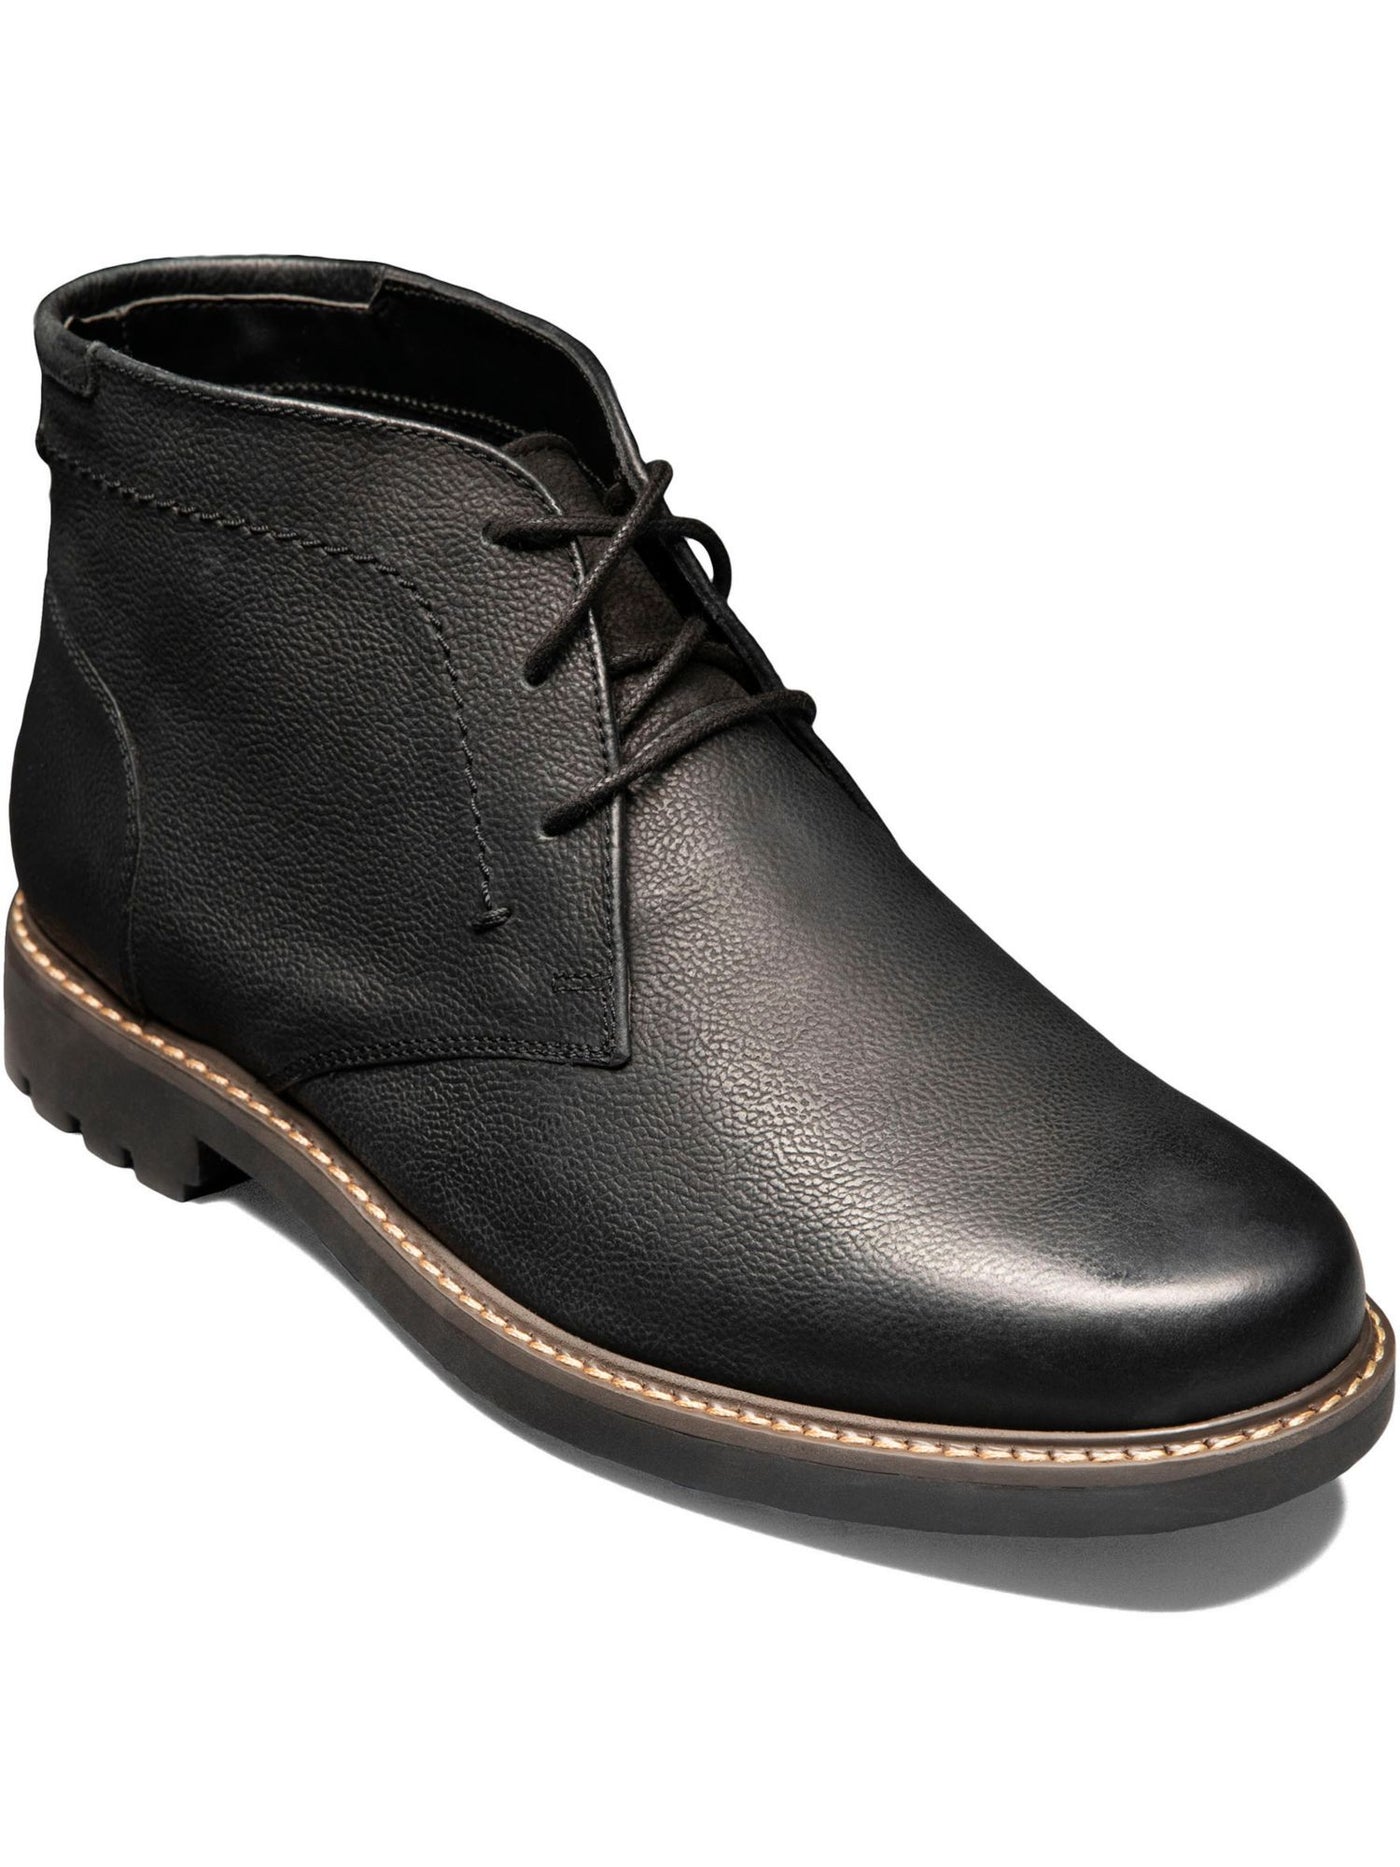 FLORSHEIM Mens Black Lug Sole Removable Insole Field Round Toe Block Heel Lace-Up Leather Chukka Boots 9 M